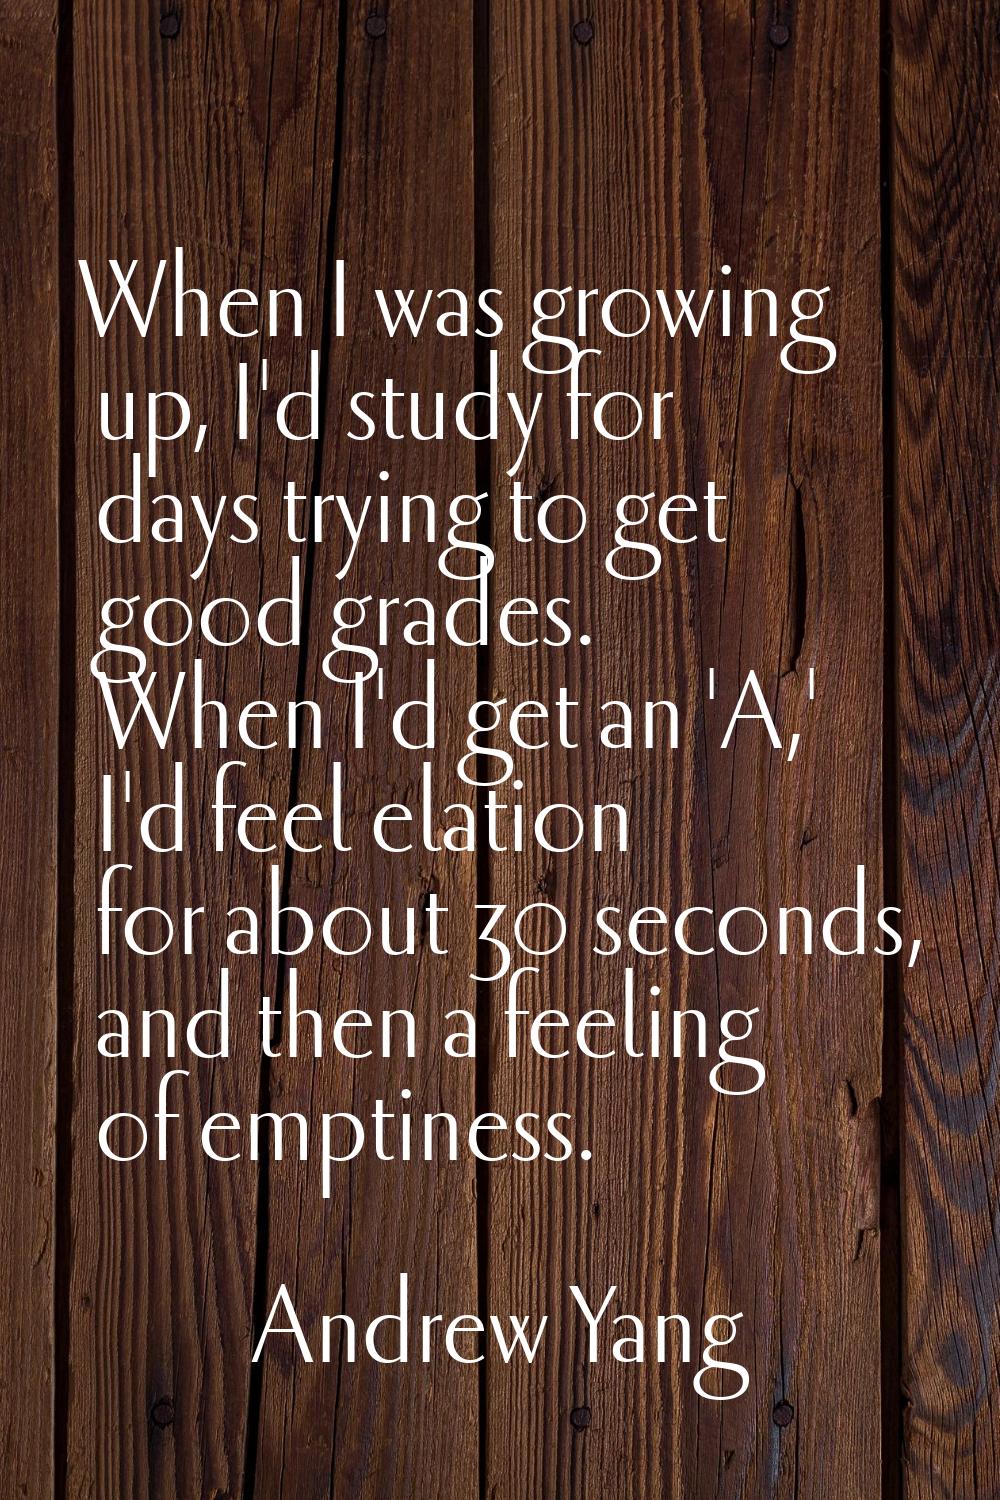 When I was growing up, I'd study for days trying to get good grades. When I'd get an 'A,' I'd feel 